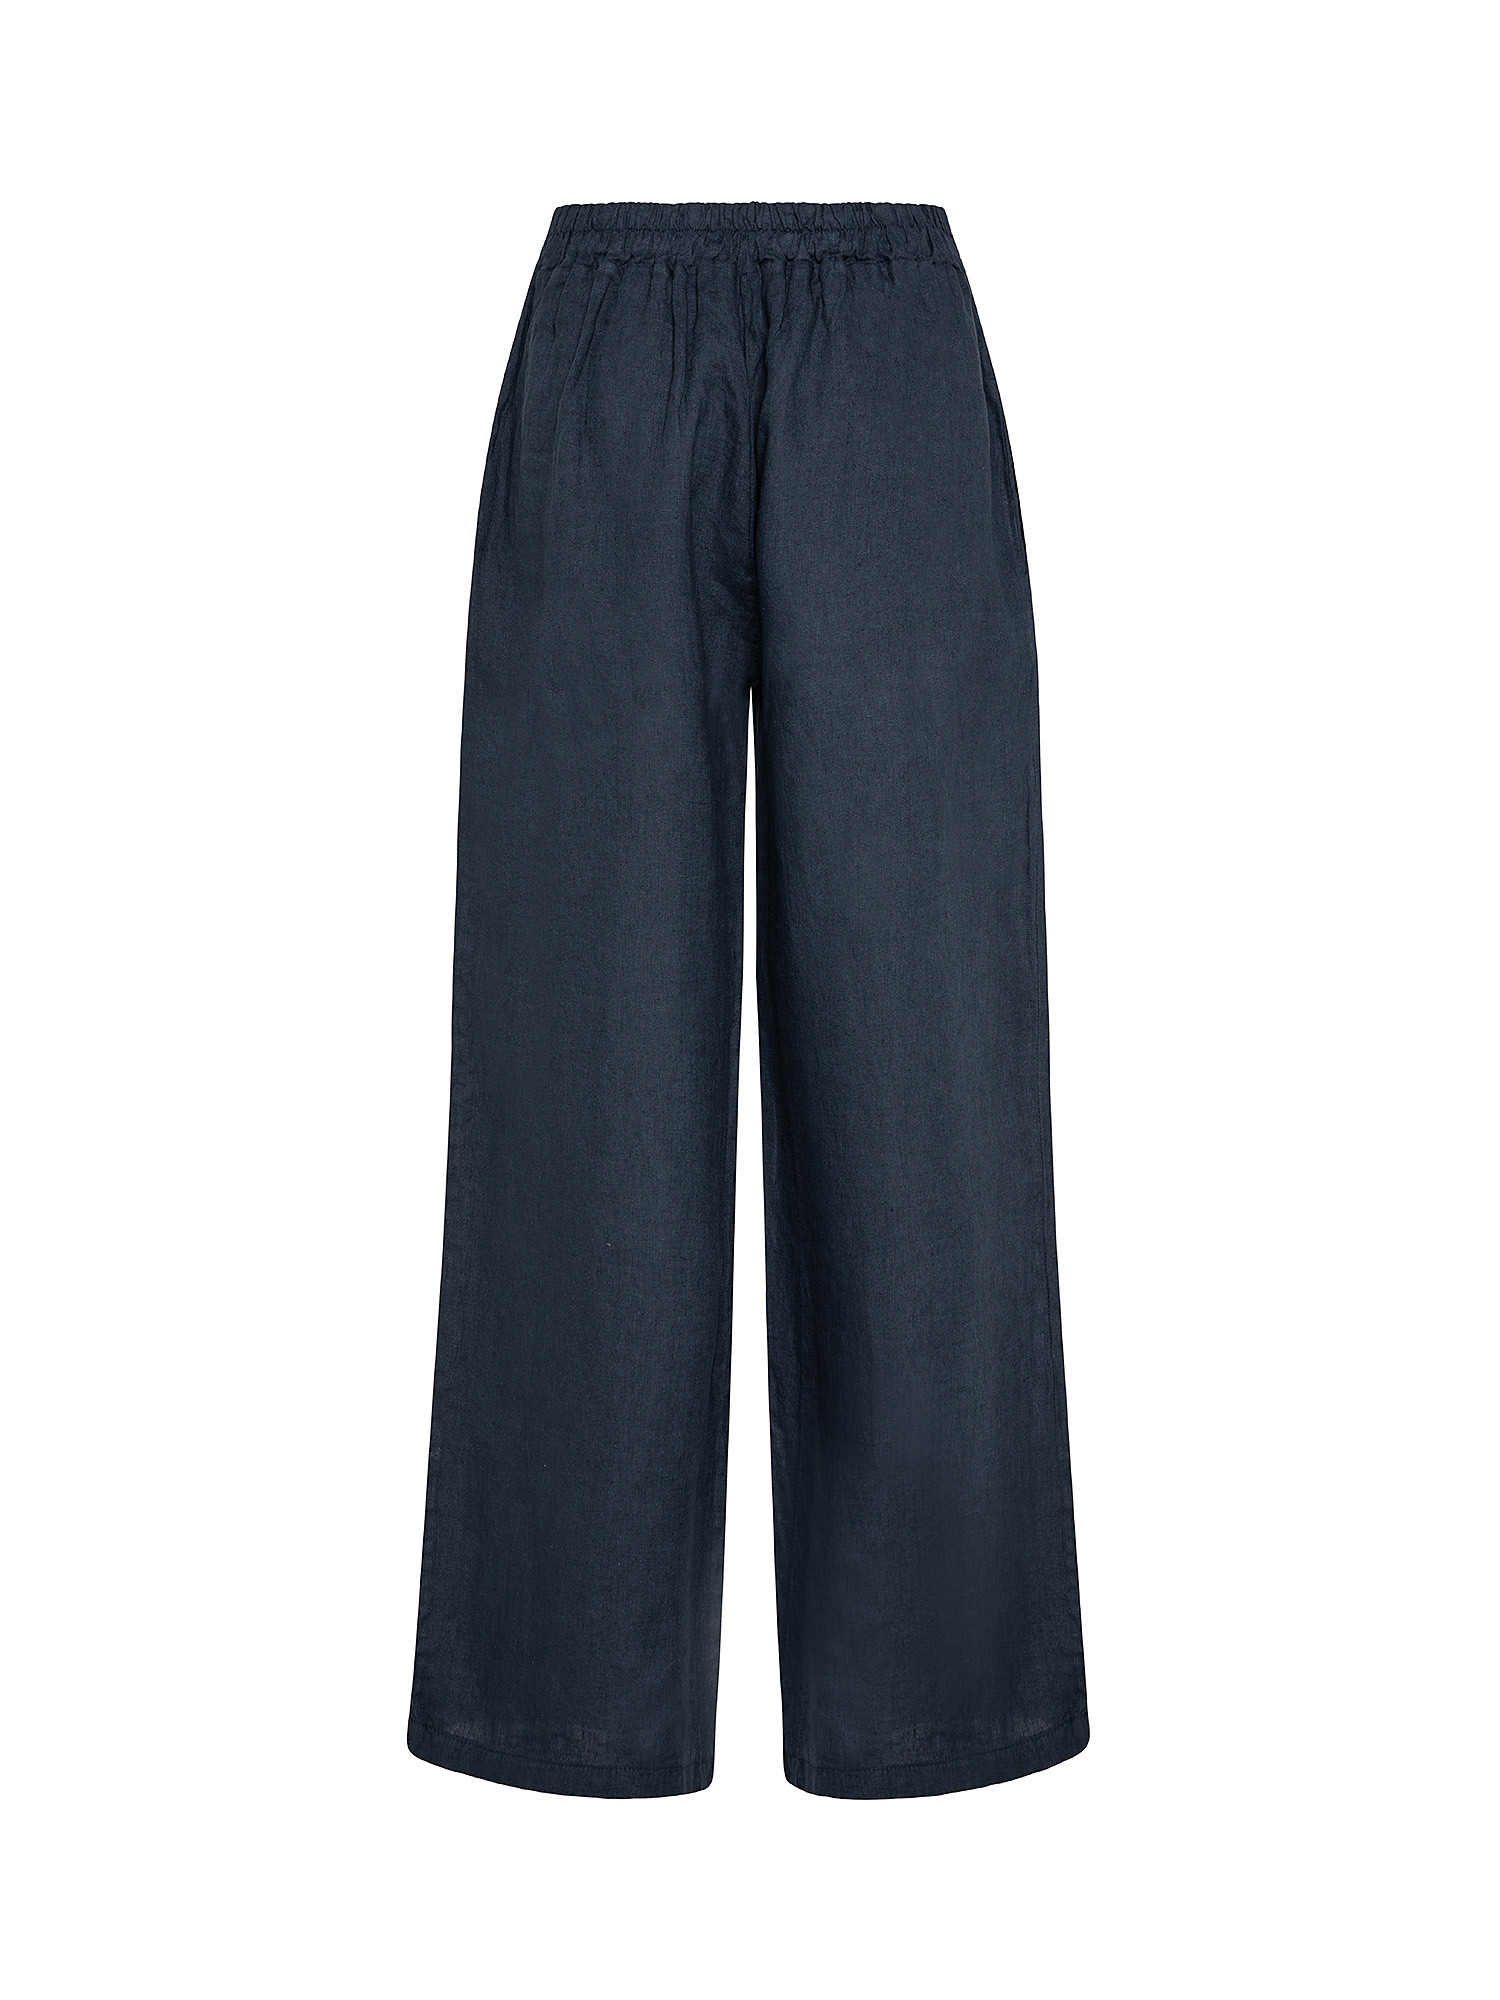 Wide pure linen trousers, Blue, large image number 1